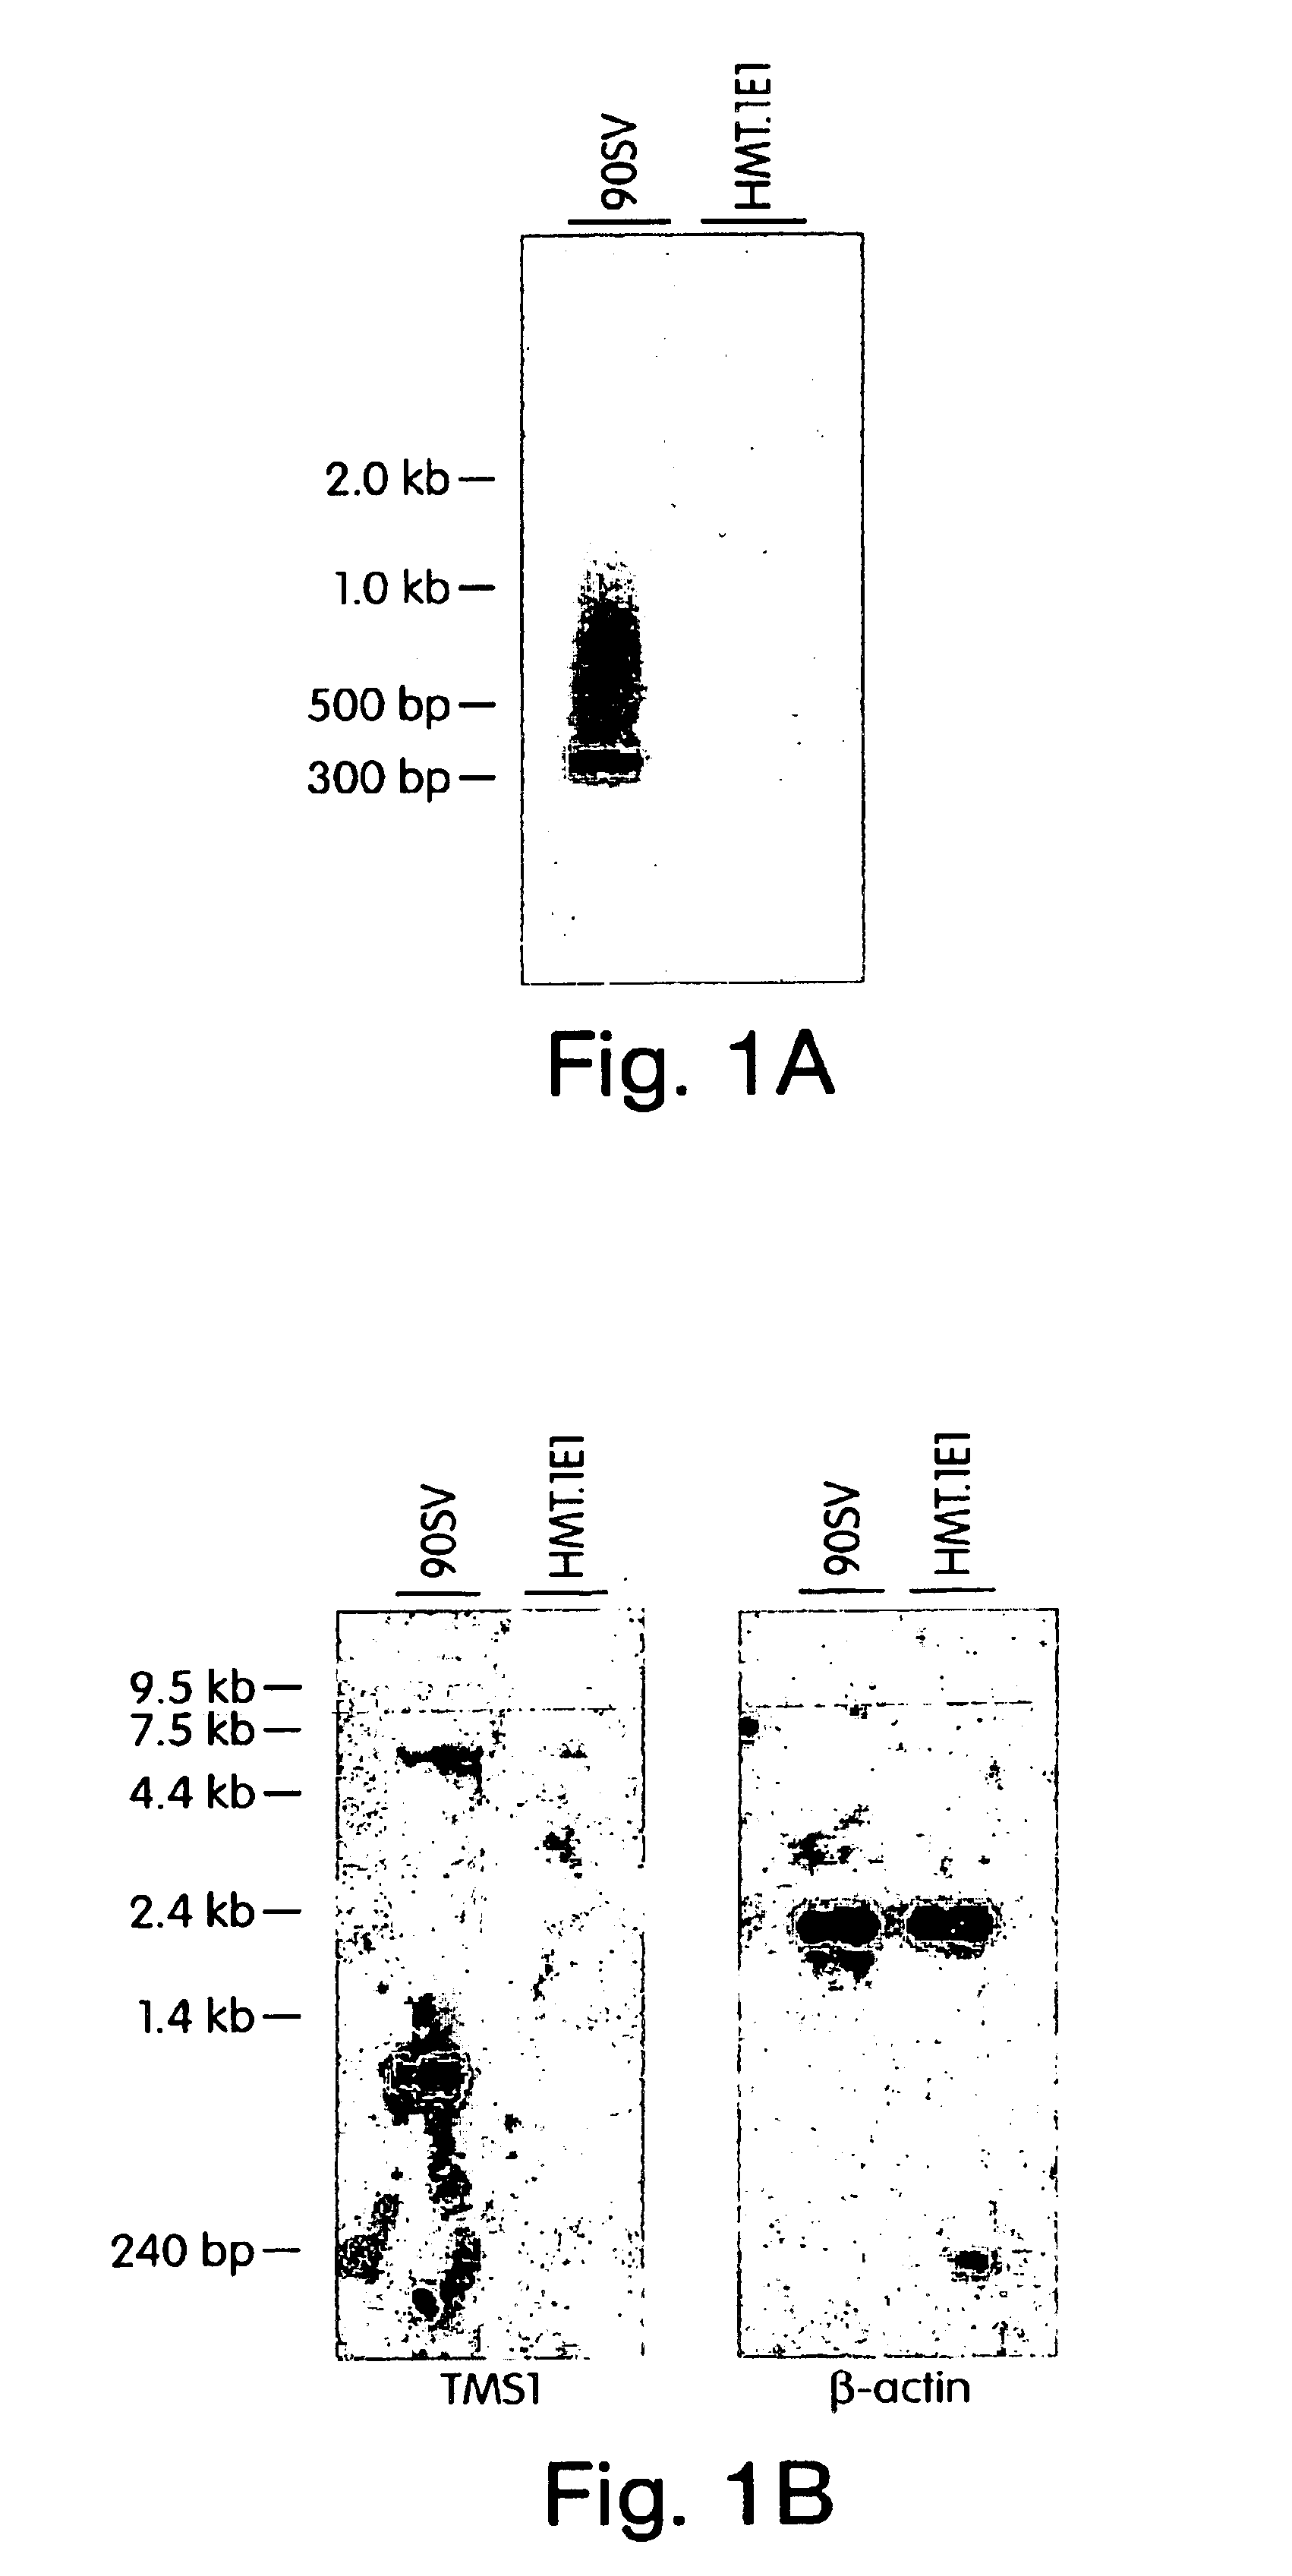 TMS1 compositions and methods of use